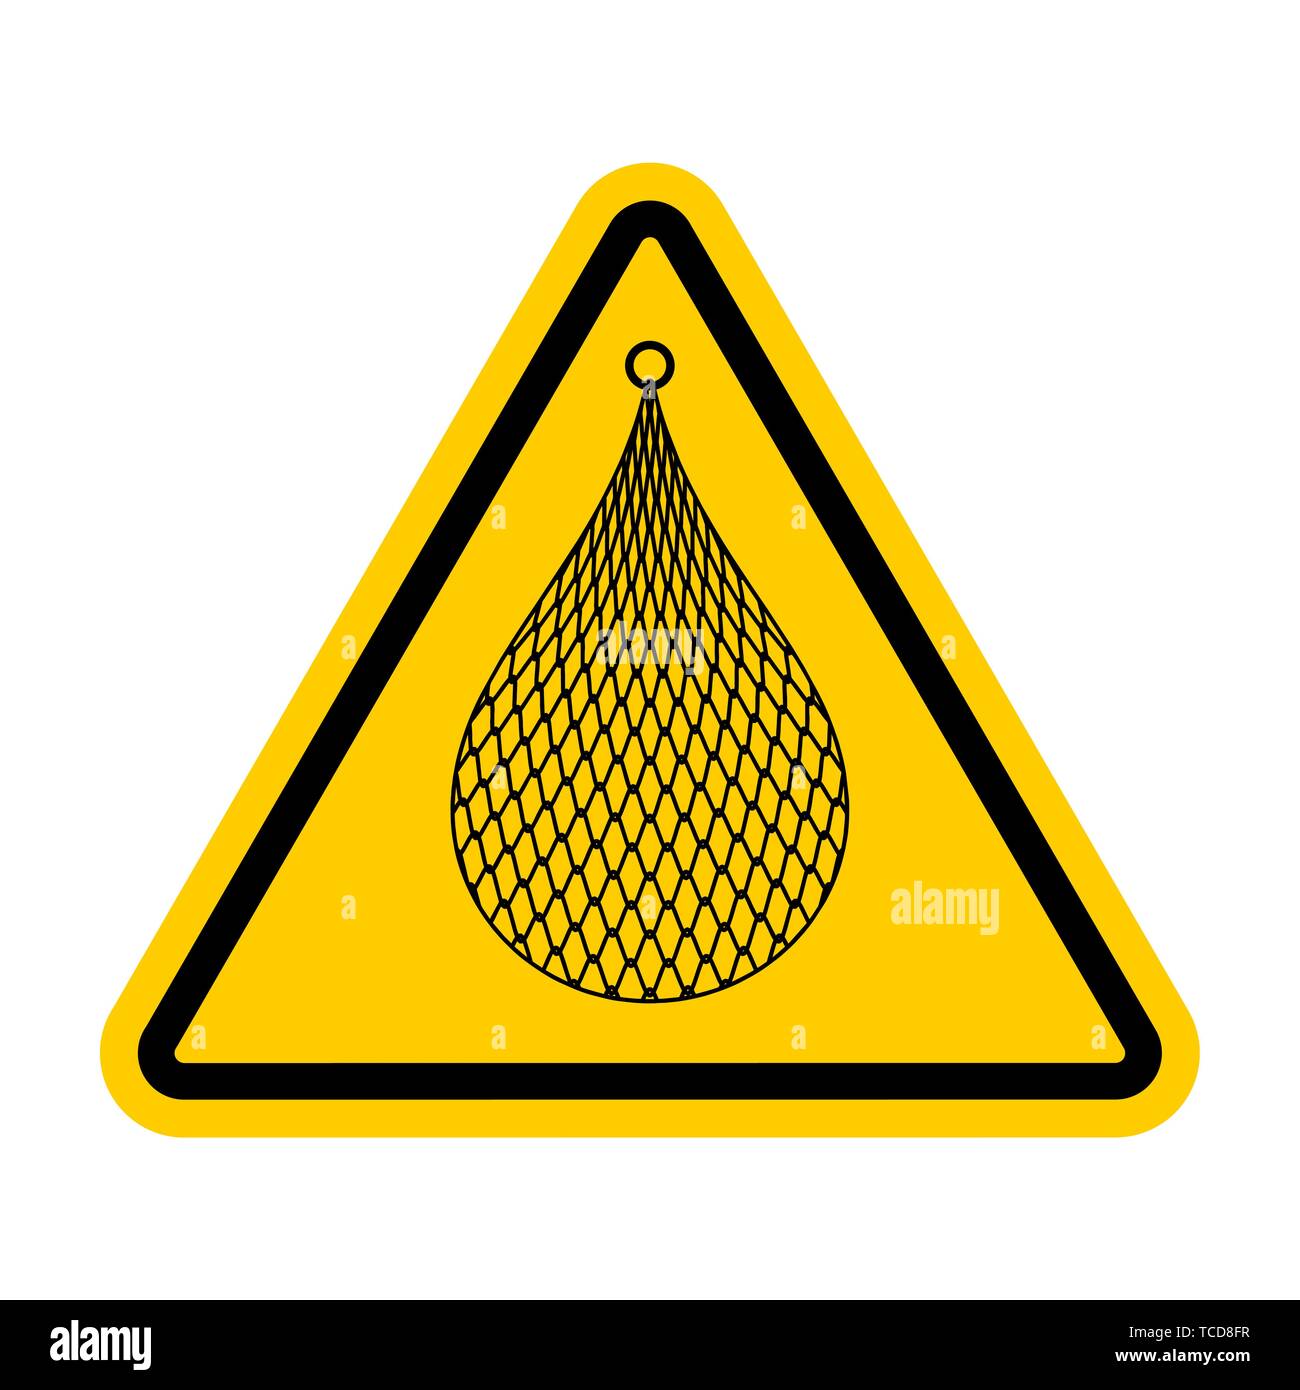 Attention Fishnet. Caution fishing. yellow triangle road sign Stock Vector